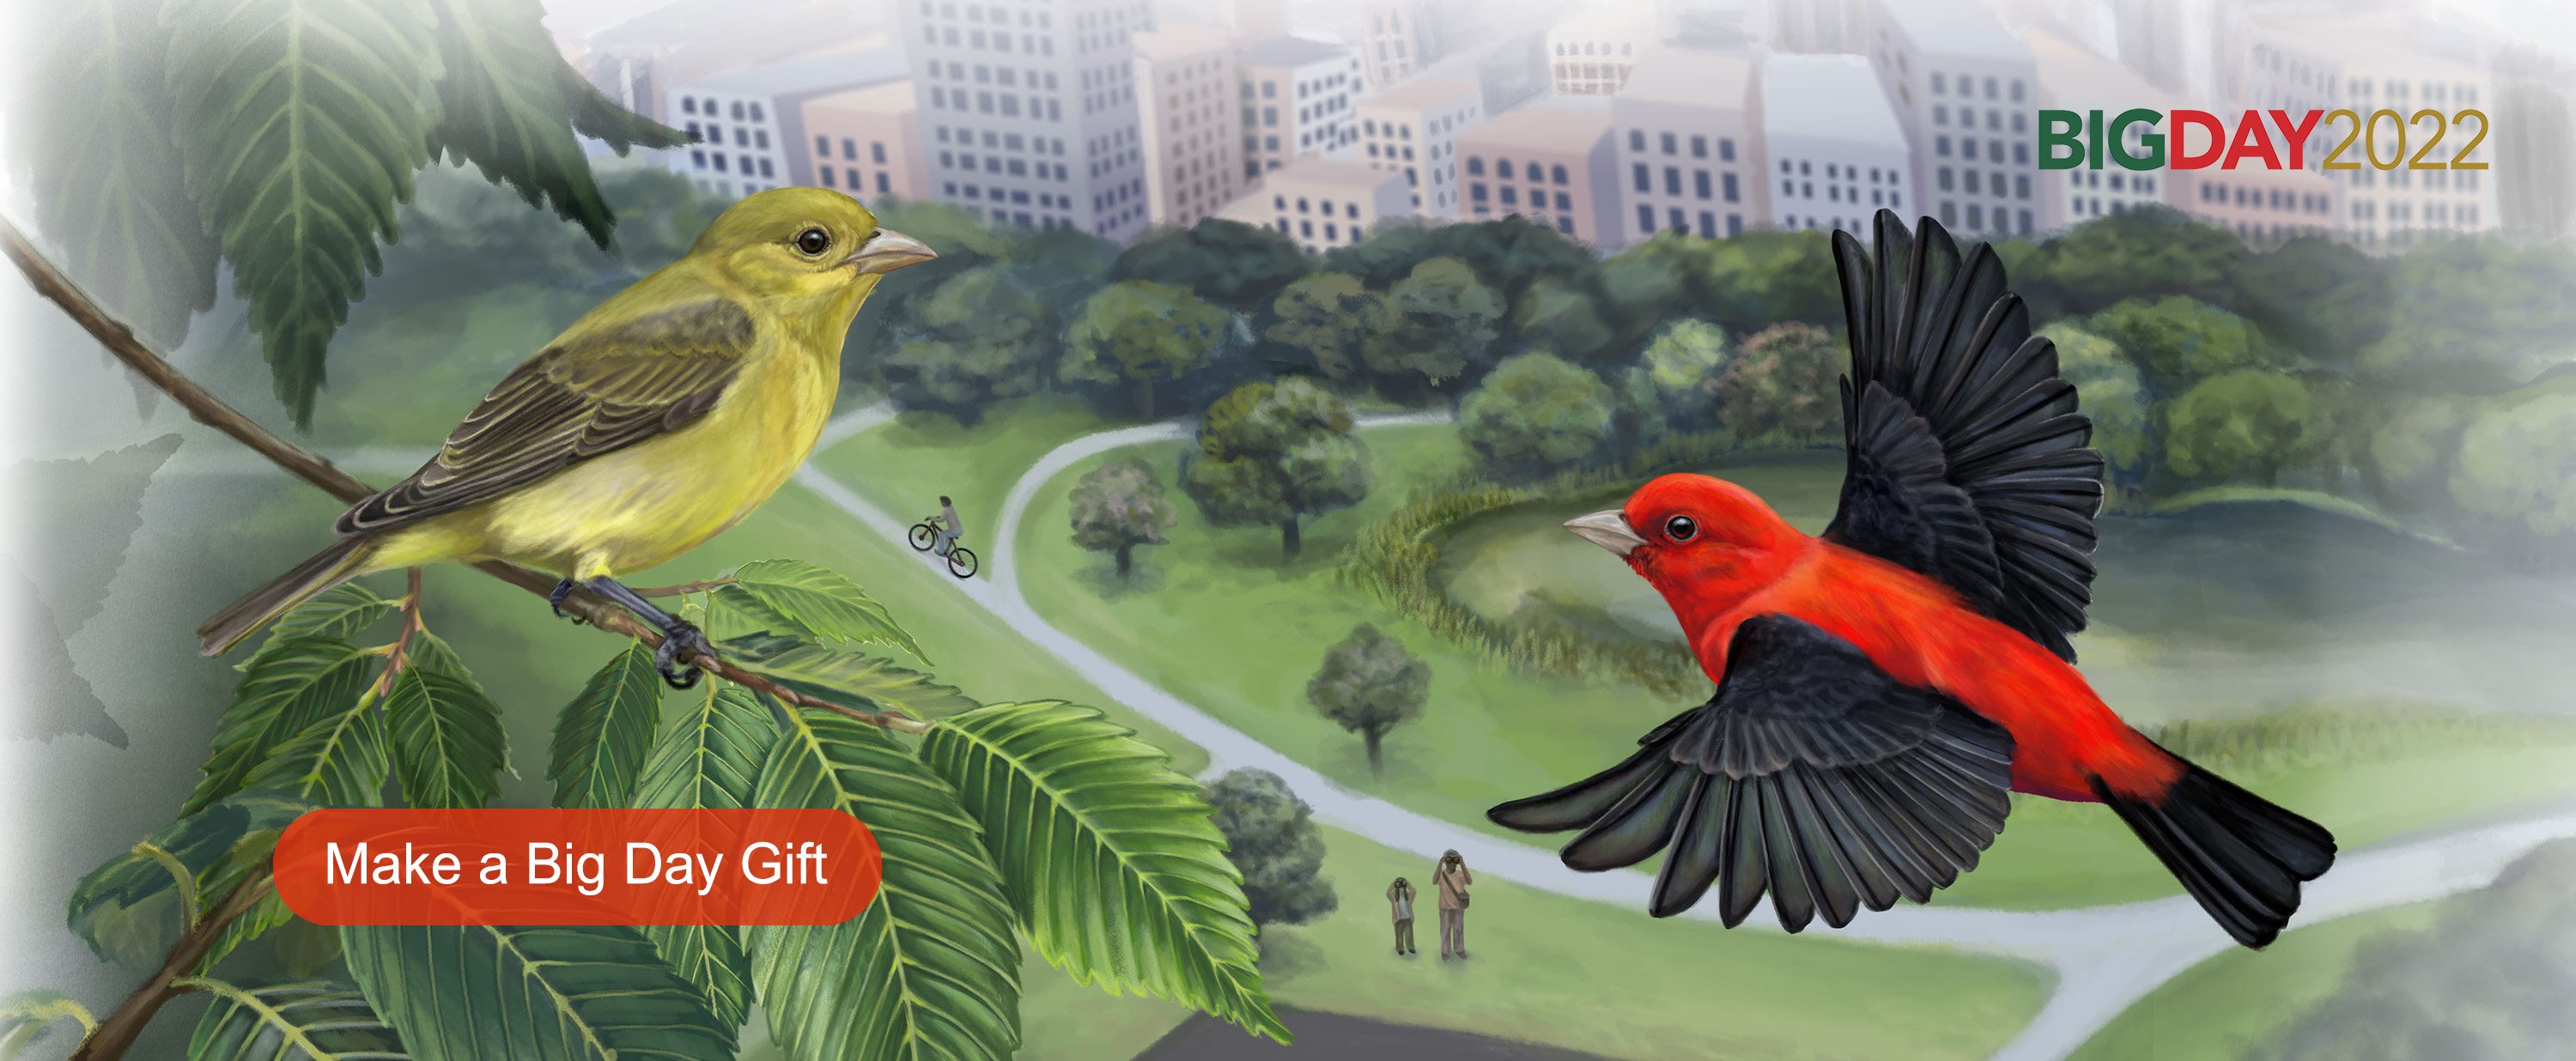 Illustration of Scarlet Tanagers by Liz Wahid